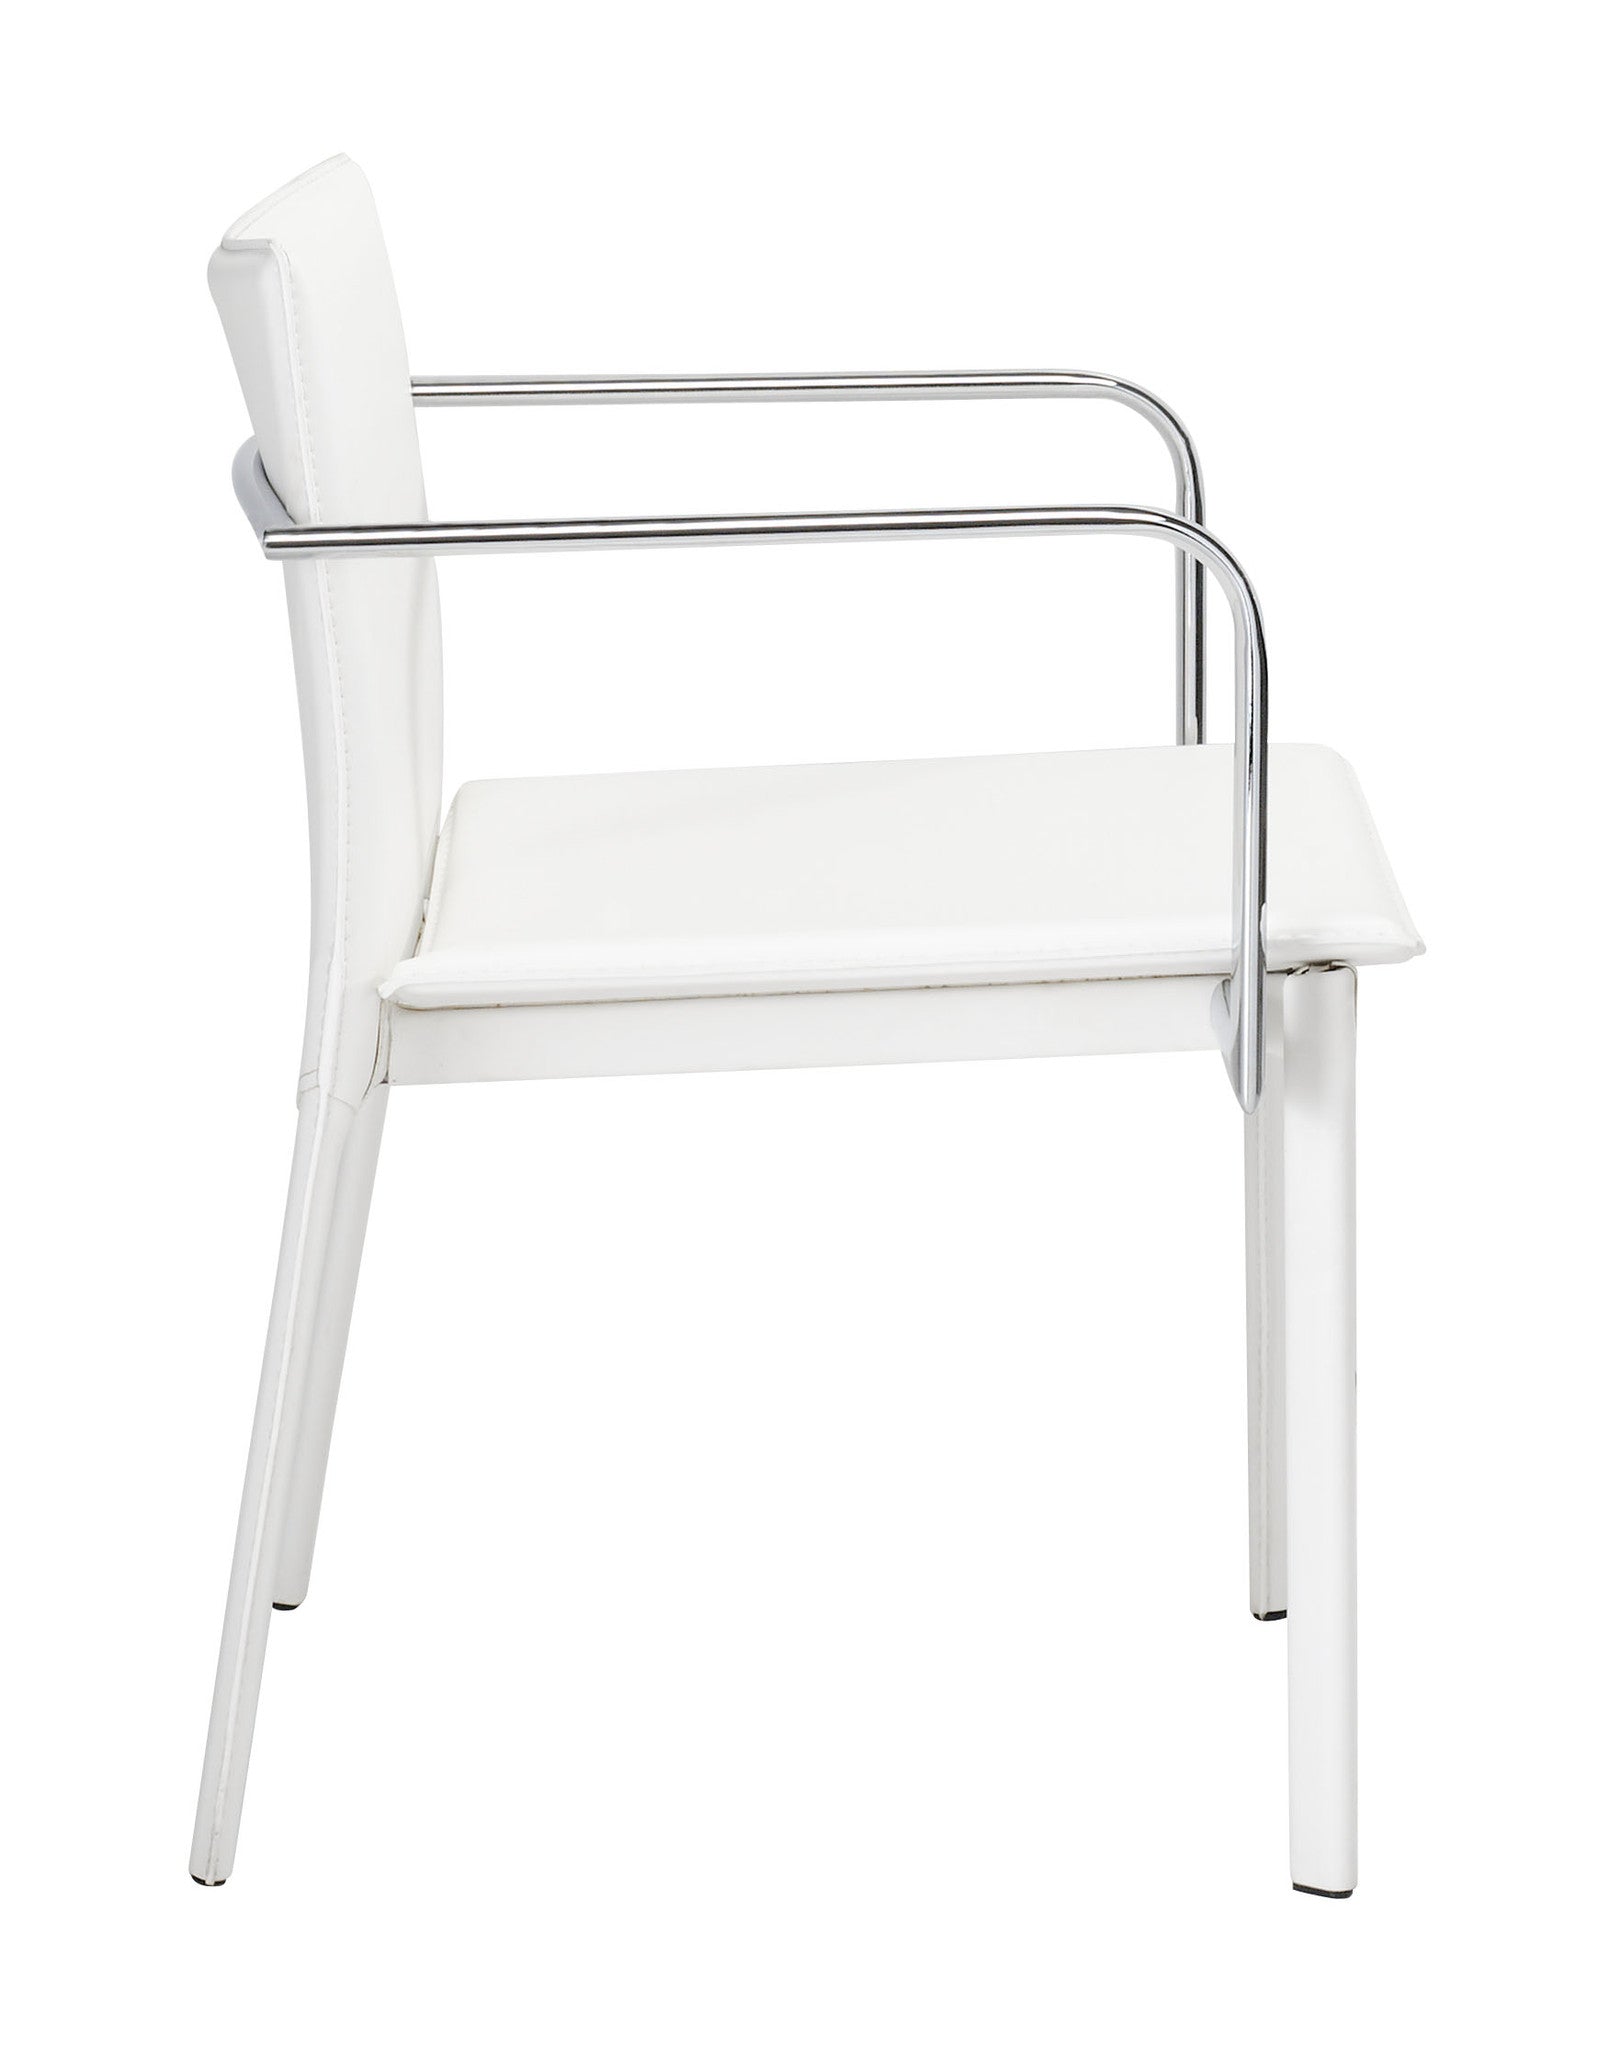 Gallant Conference Chair White (Set of 2)